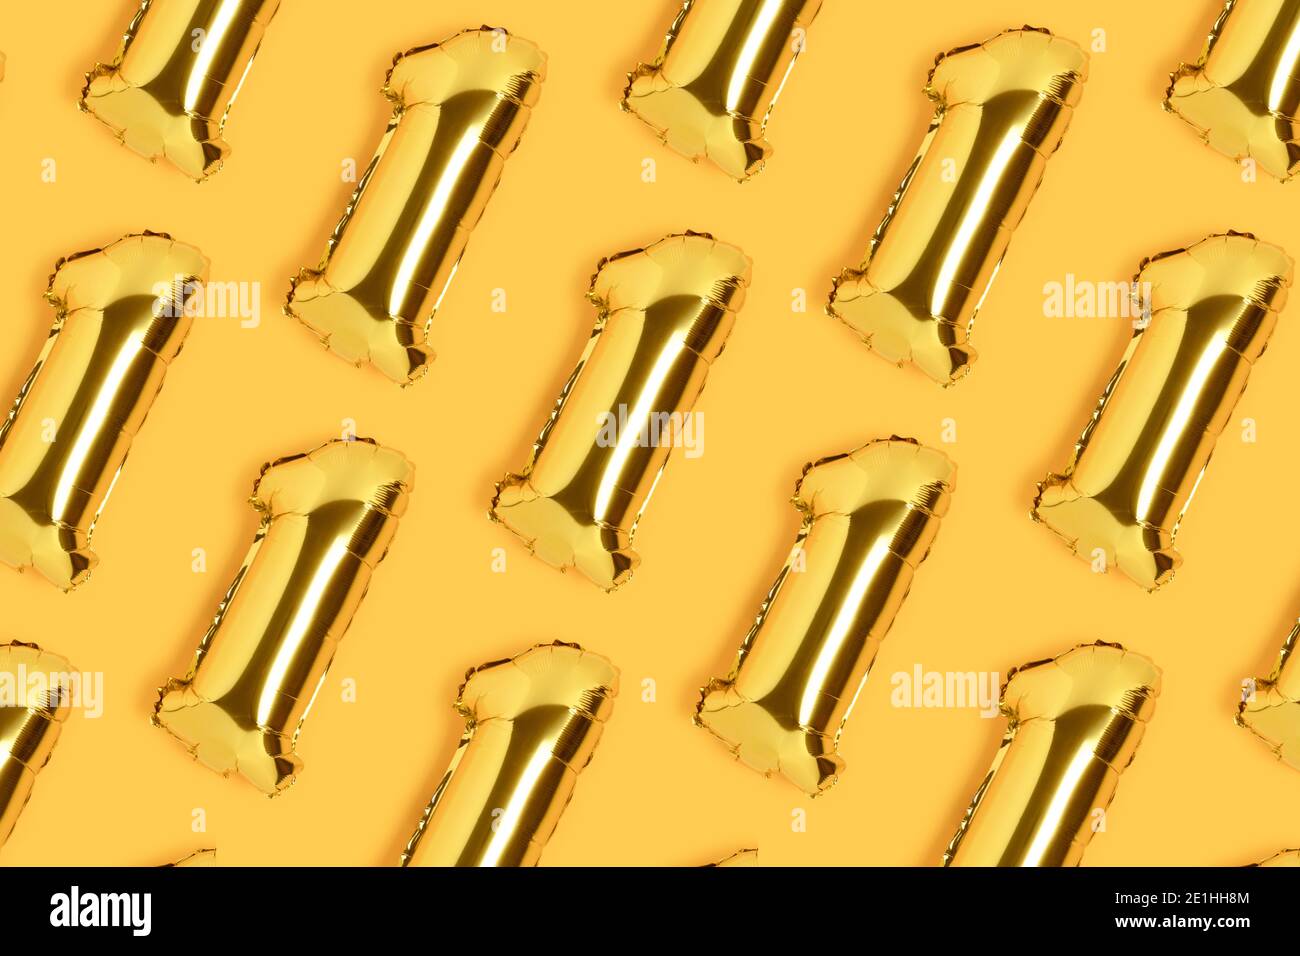 Number 1 golden balloons pattern. One year anniversary celebration concept on a yellow background. Stock Photo